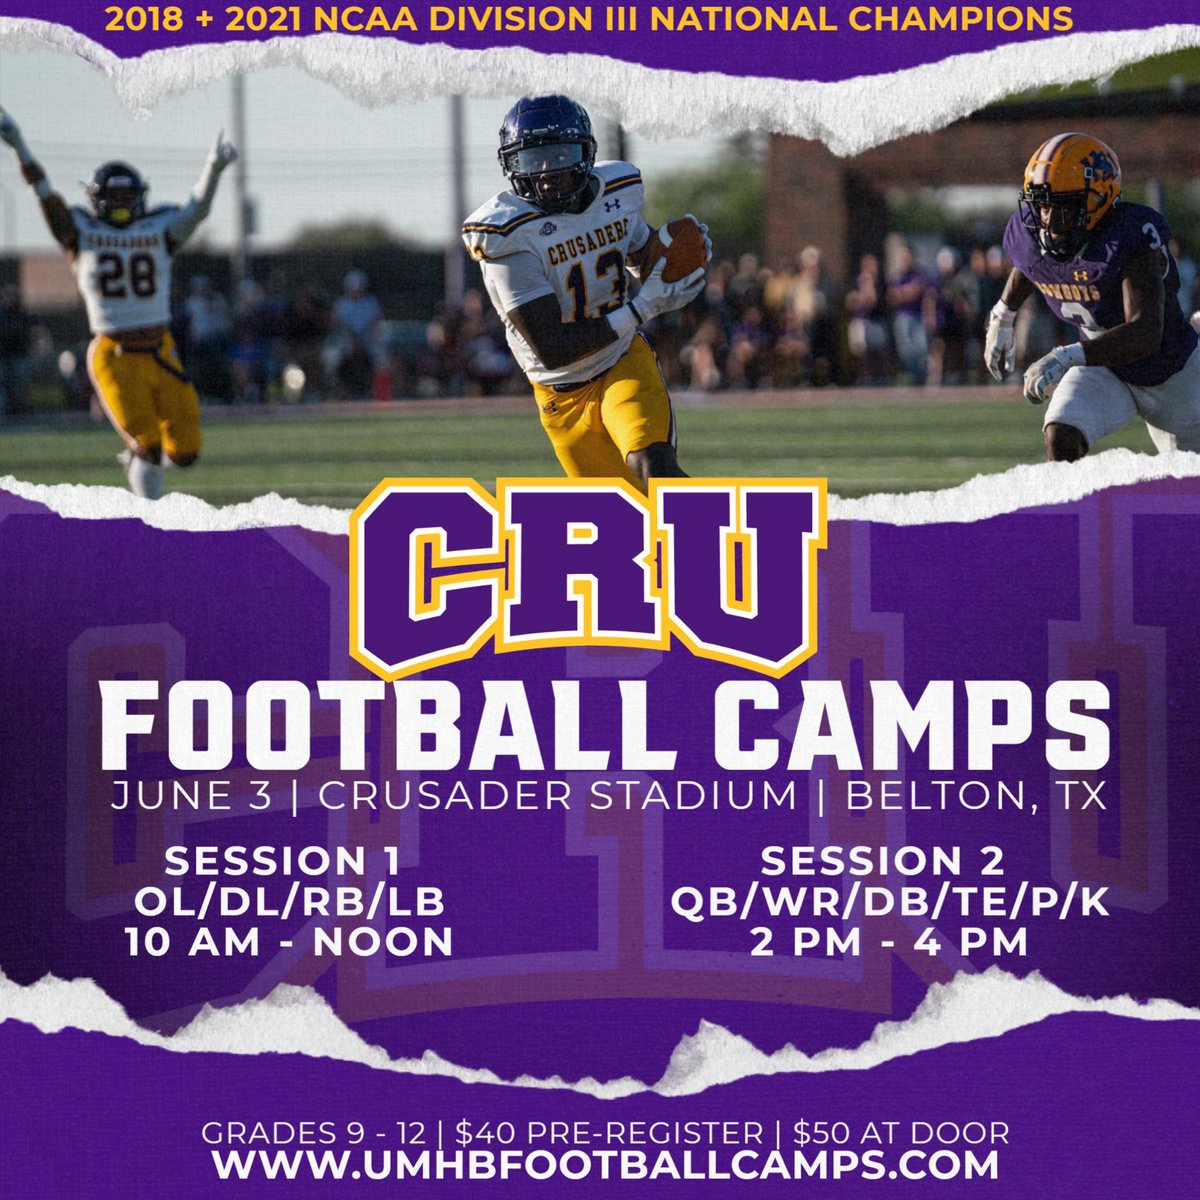 Don’t miss out on a chance to Camp With The Elite here in Belton, Texas! 🚨Show up and show out at one of our Big Skill or Skill sessions! 🚨 Register now using the link below! 🔗:umhbfootballcamps.com